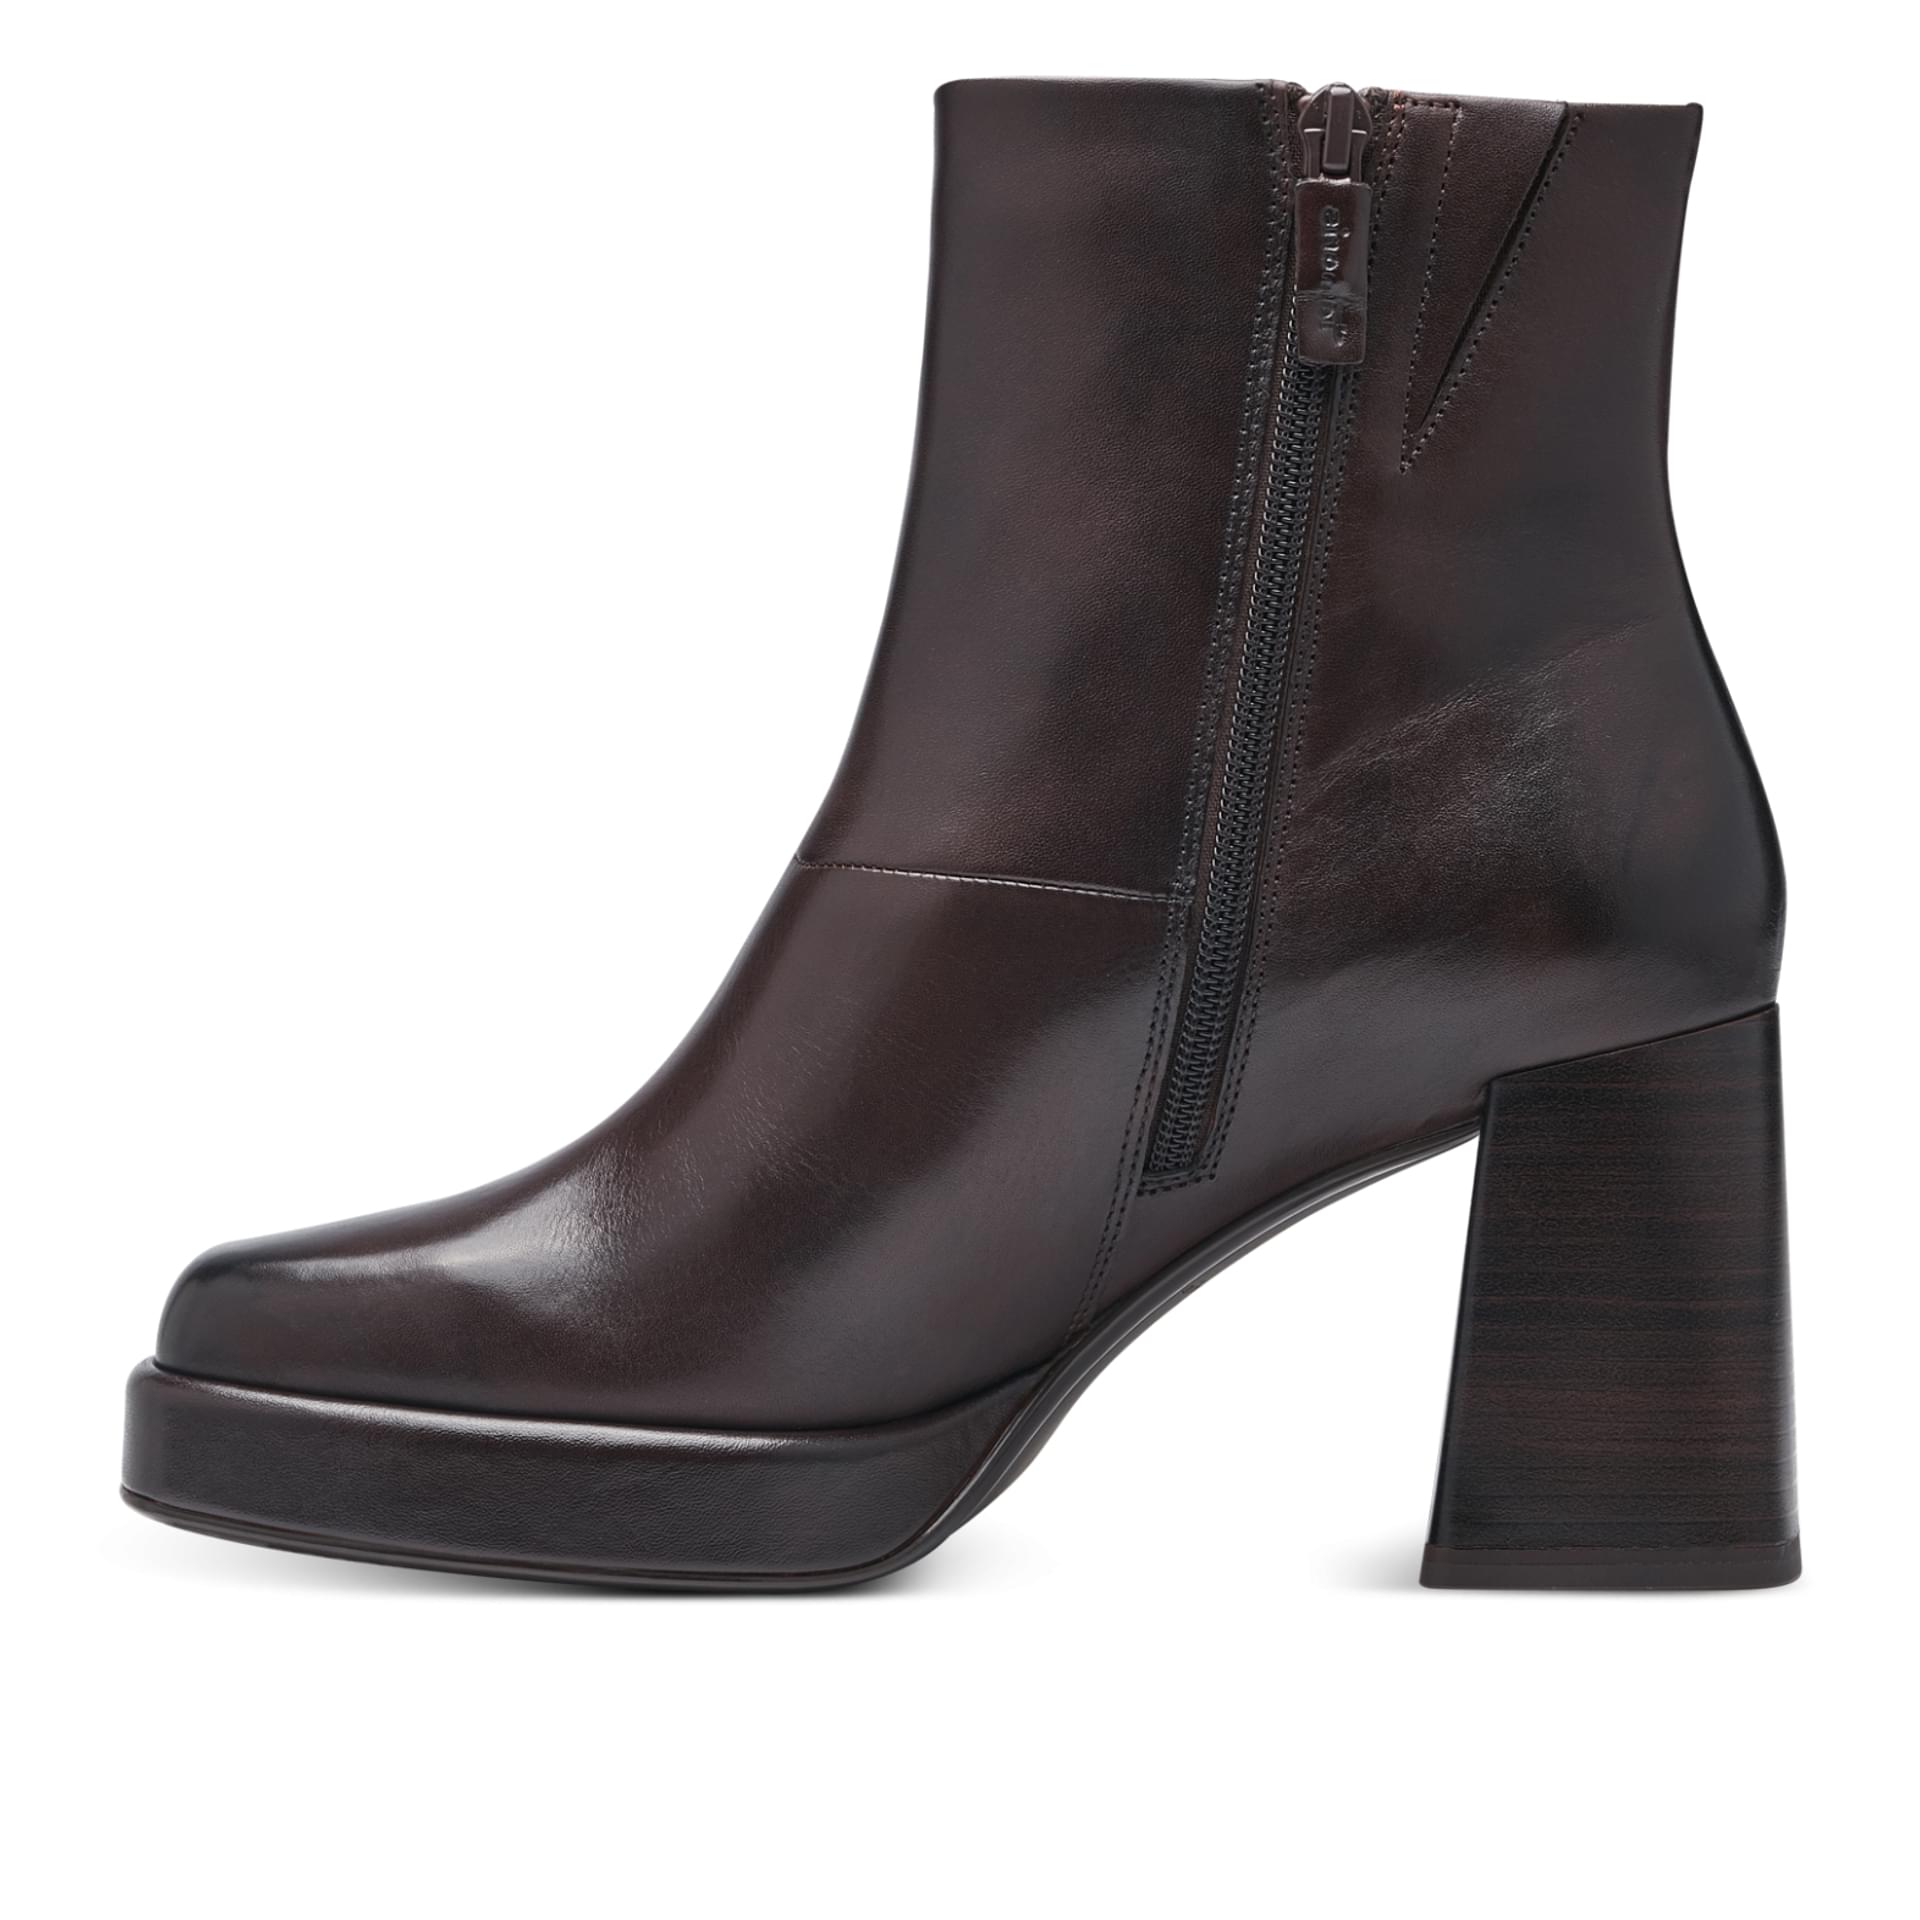 Tamaris Kyria Ankle Boots 1-25362-41 in Mahogany